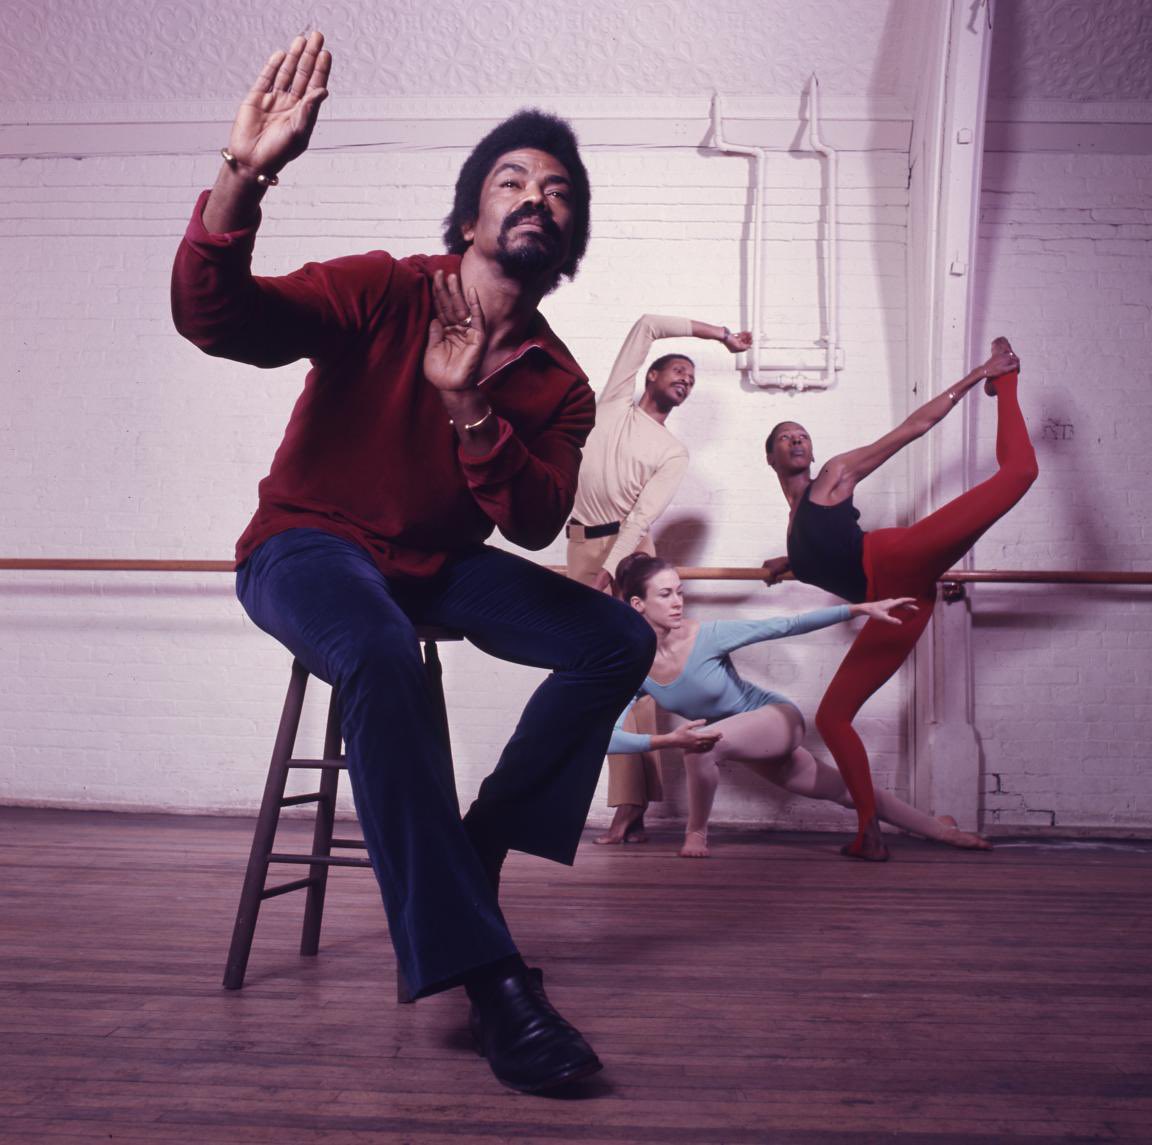 In 1969 he founded the Alvin Ailey American Dance Center with Pearl Lang. Their goal was to provide access to the arts in under-resourced communities. The school currently is located in New York City trains over 3,000 students annually.